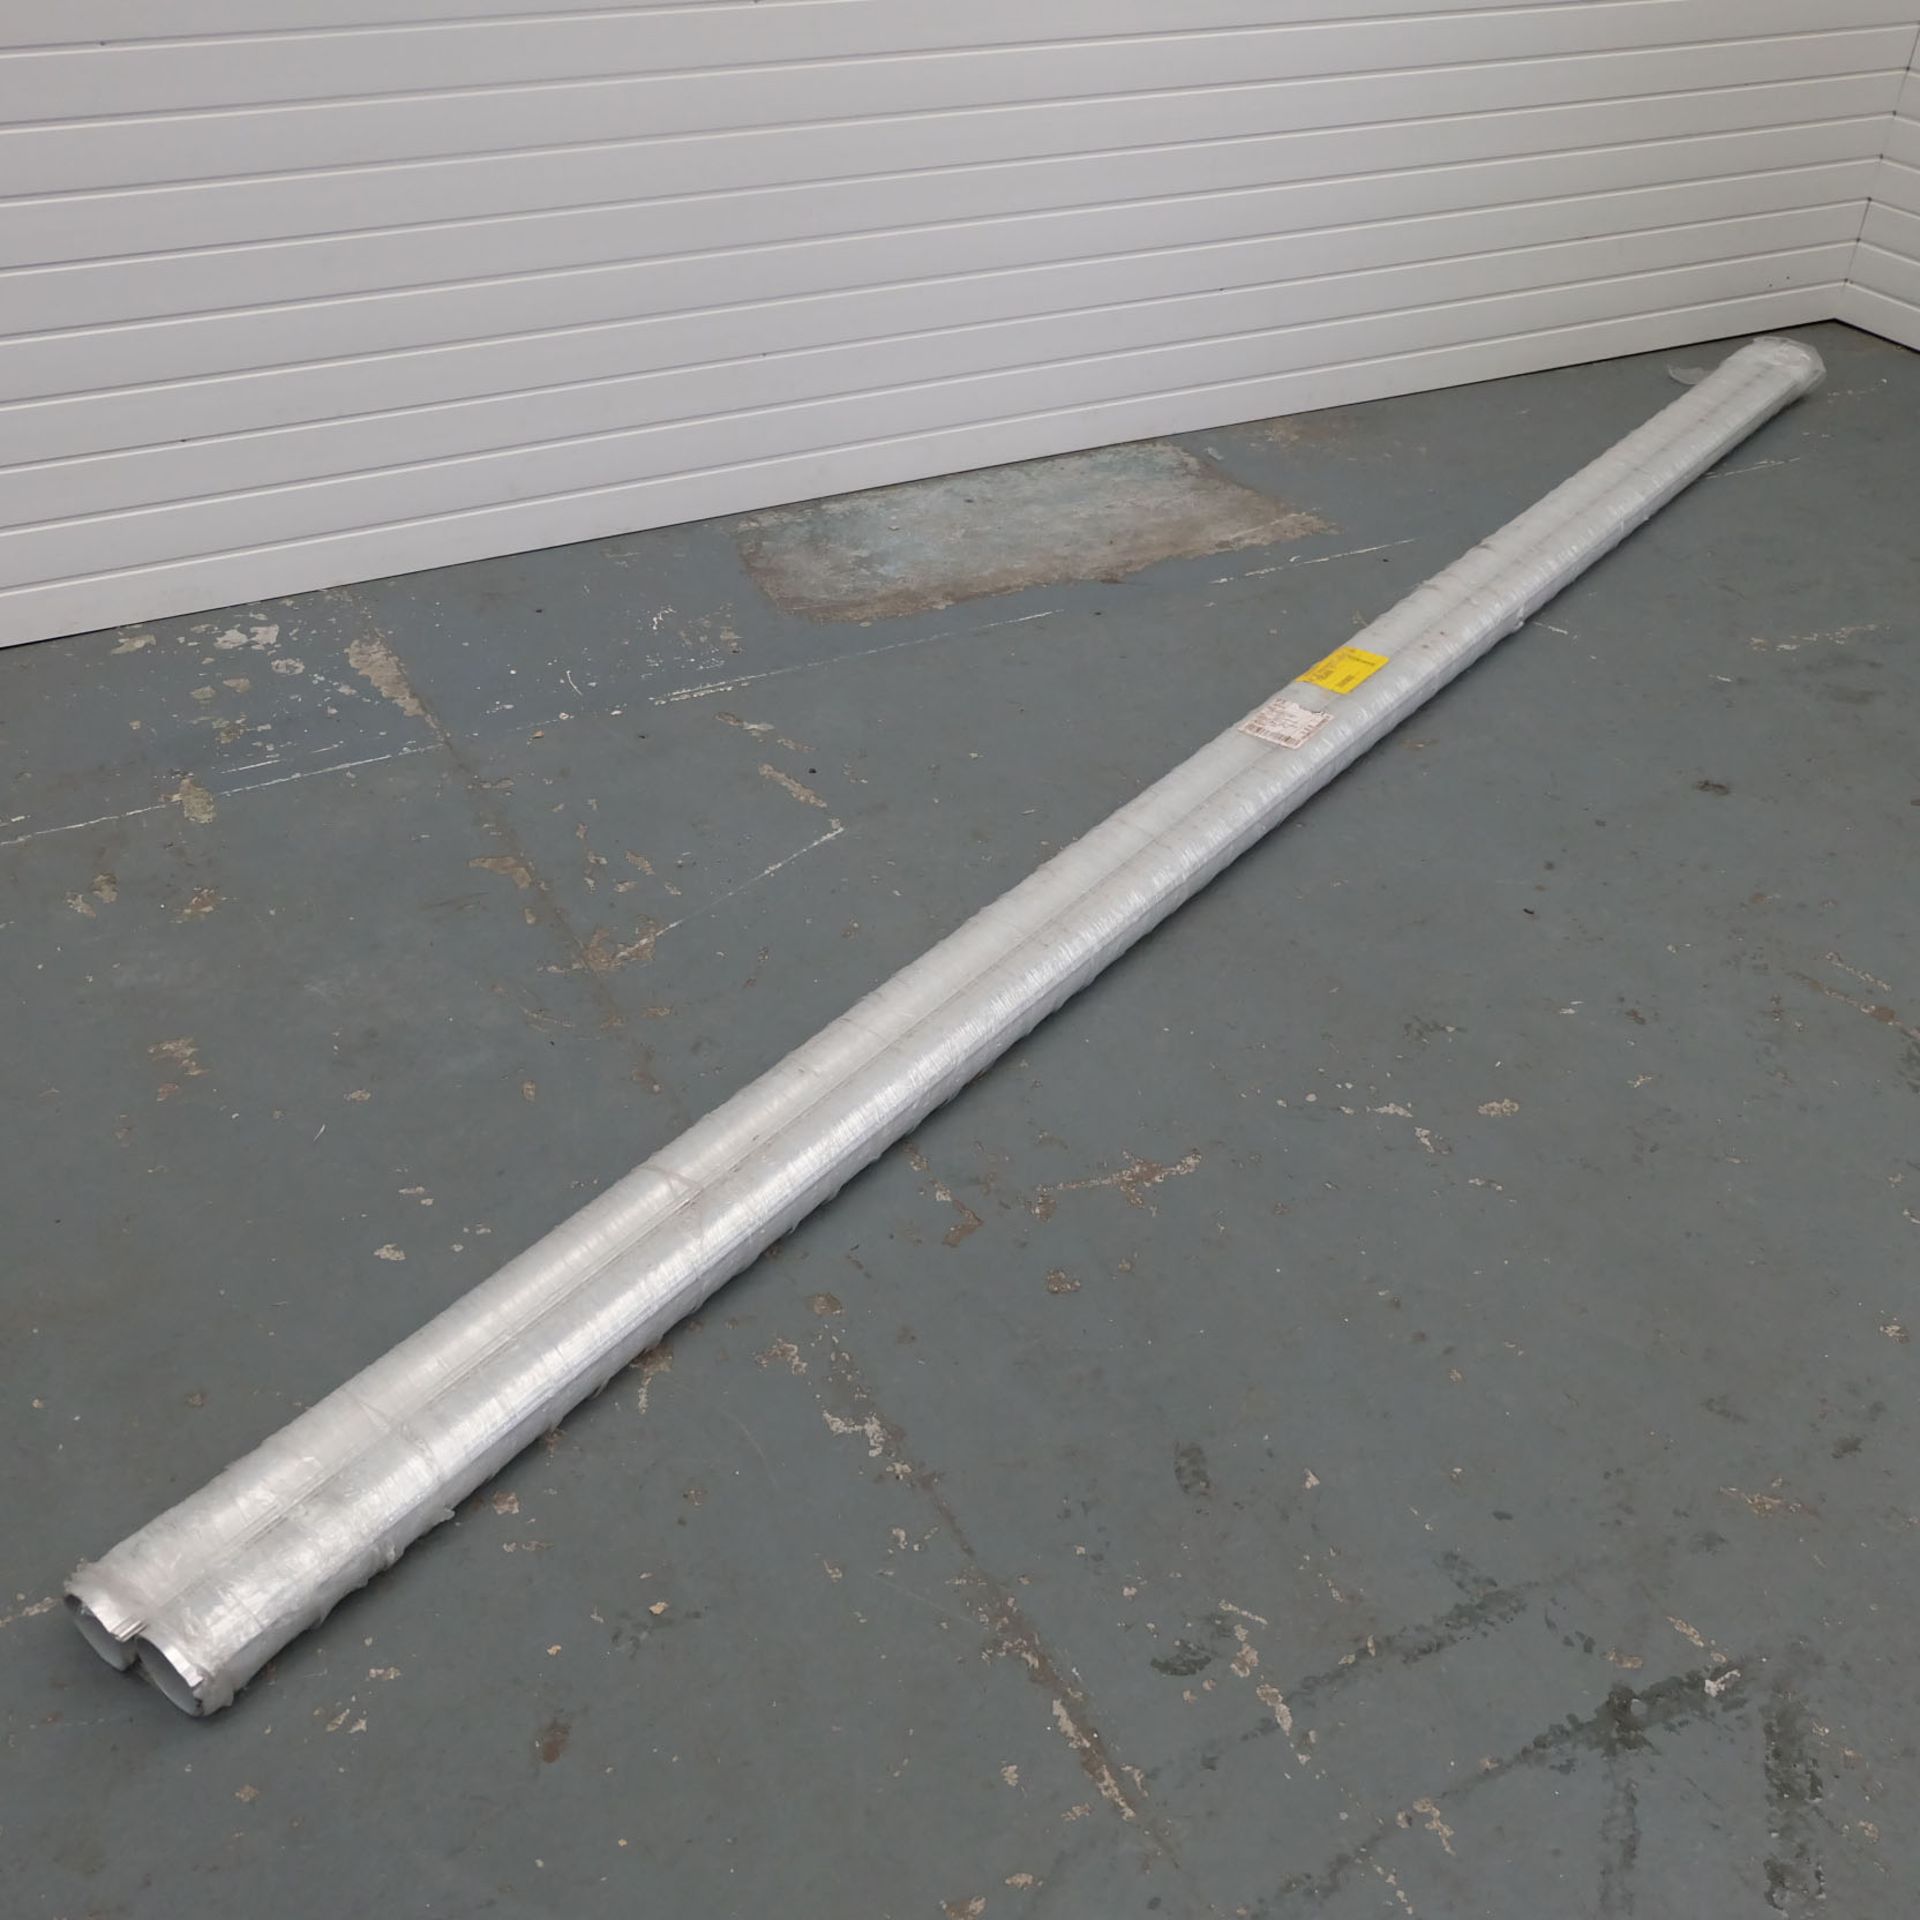 Two Aluminium Profile Tubes. Dimensions 82mm Diameter x 3mm Thickness. Length 4200mm.